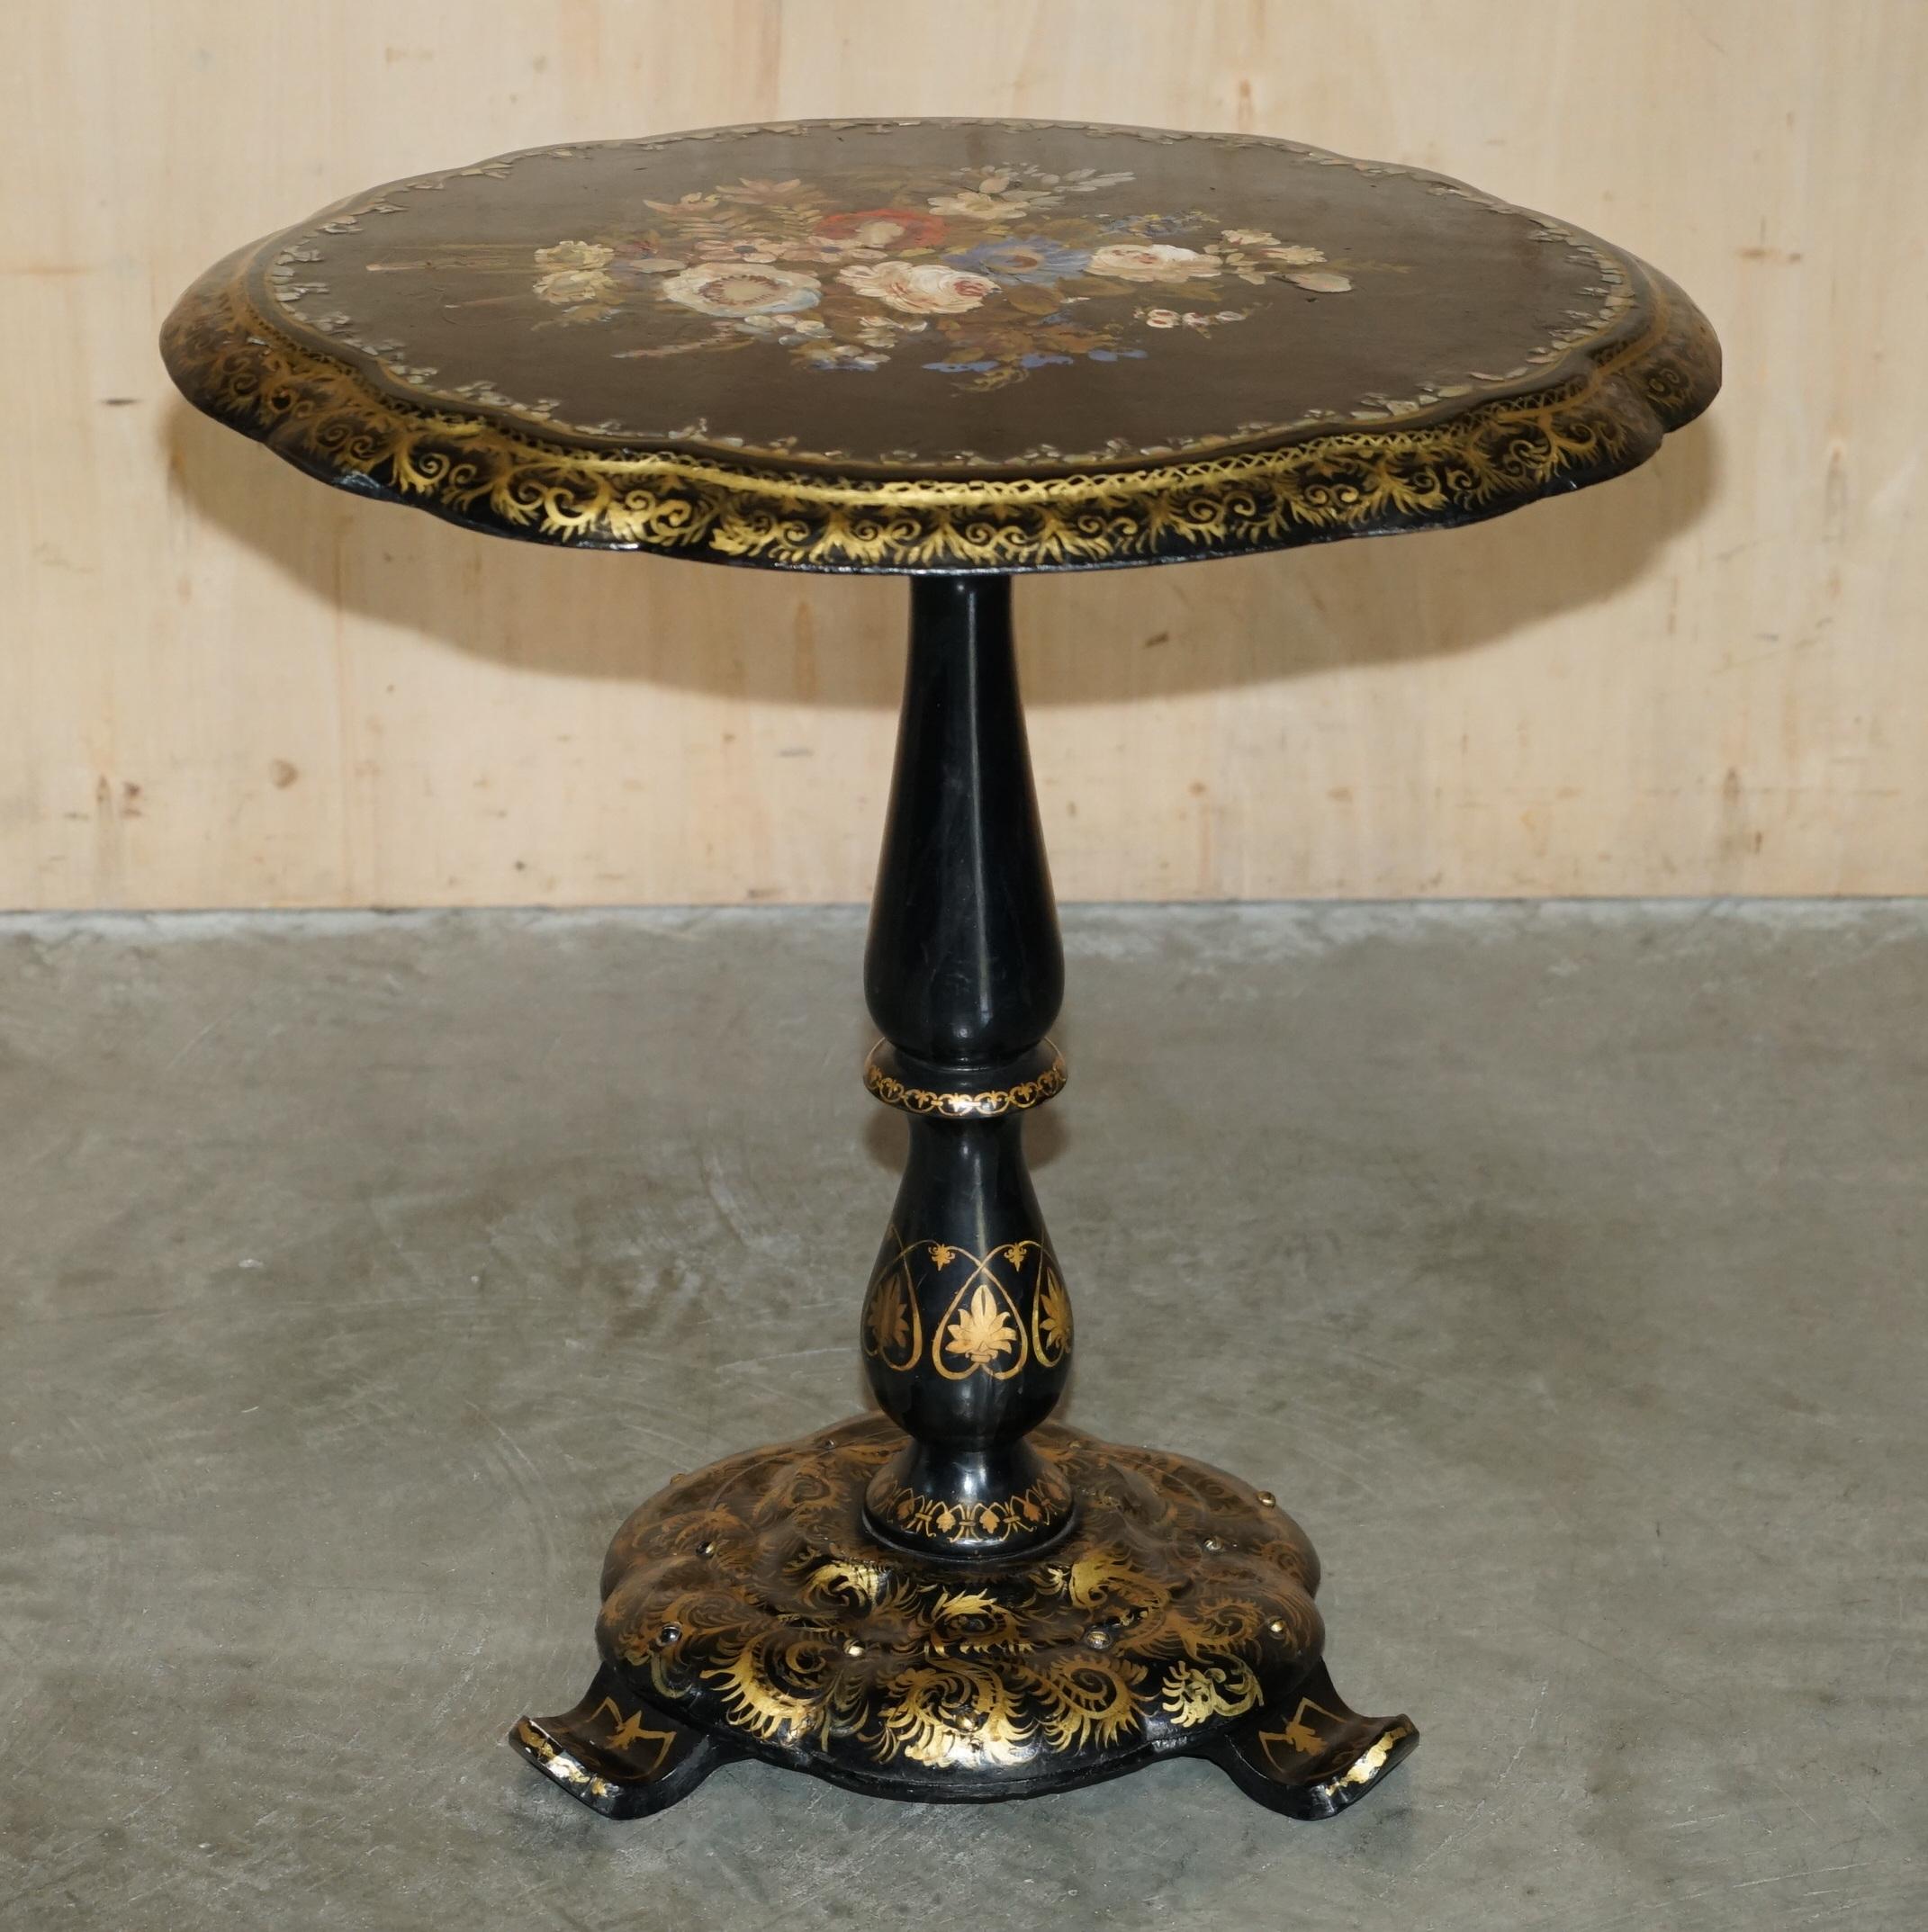 English ANTiQUE REGENCY 1815 JENNENS & BETTRIDGE STAMPED MOTHER OF PEARL TILT TOP TABLE For Sale